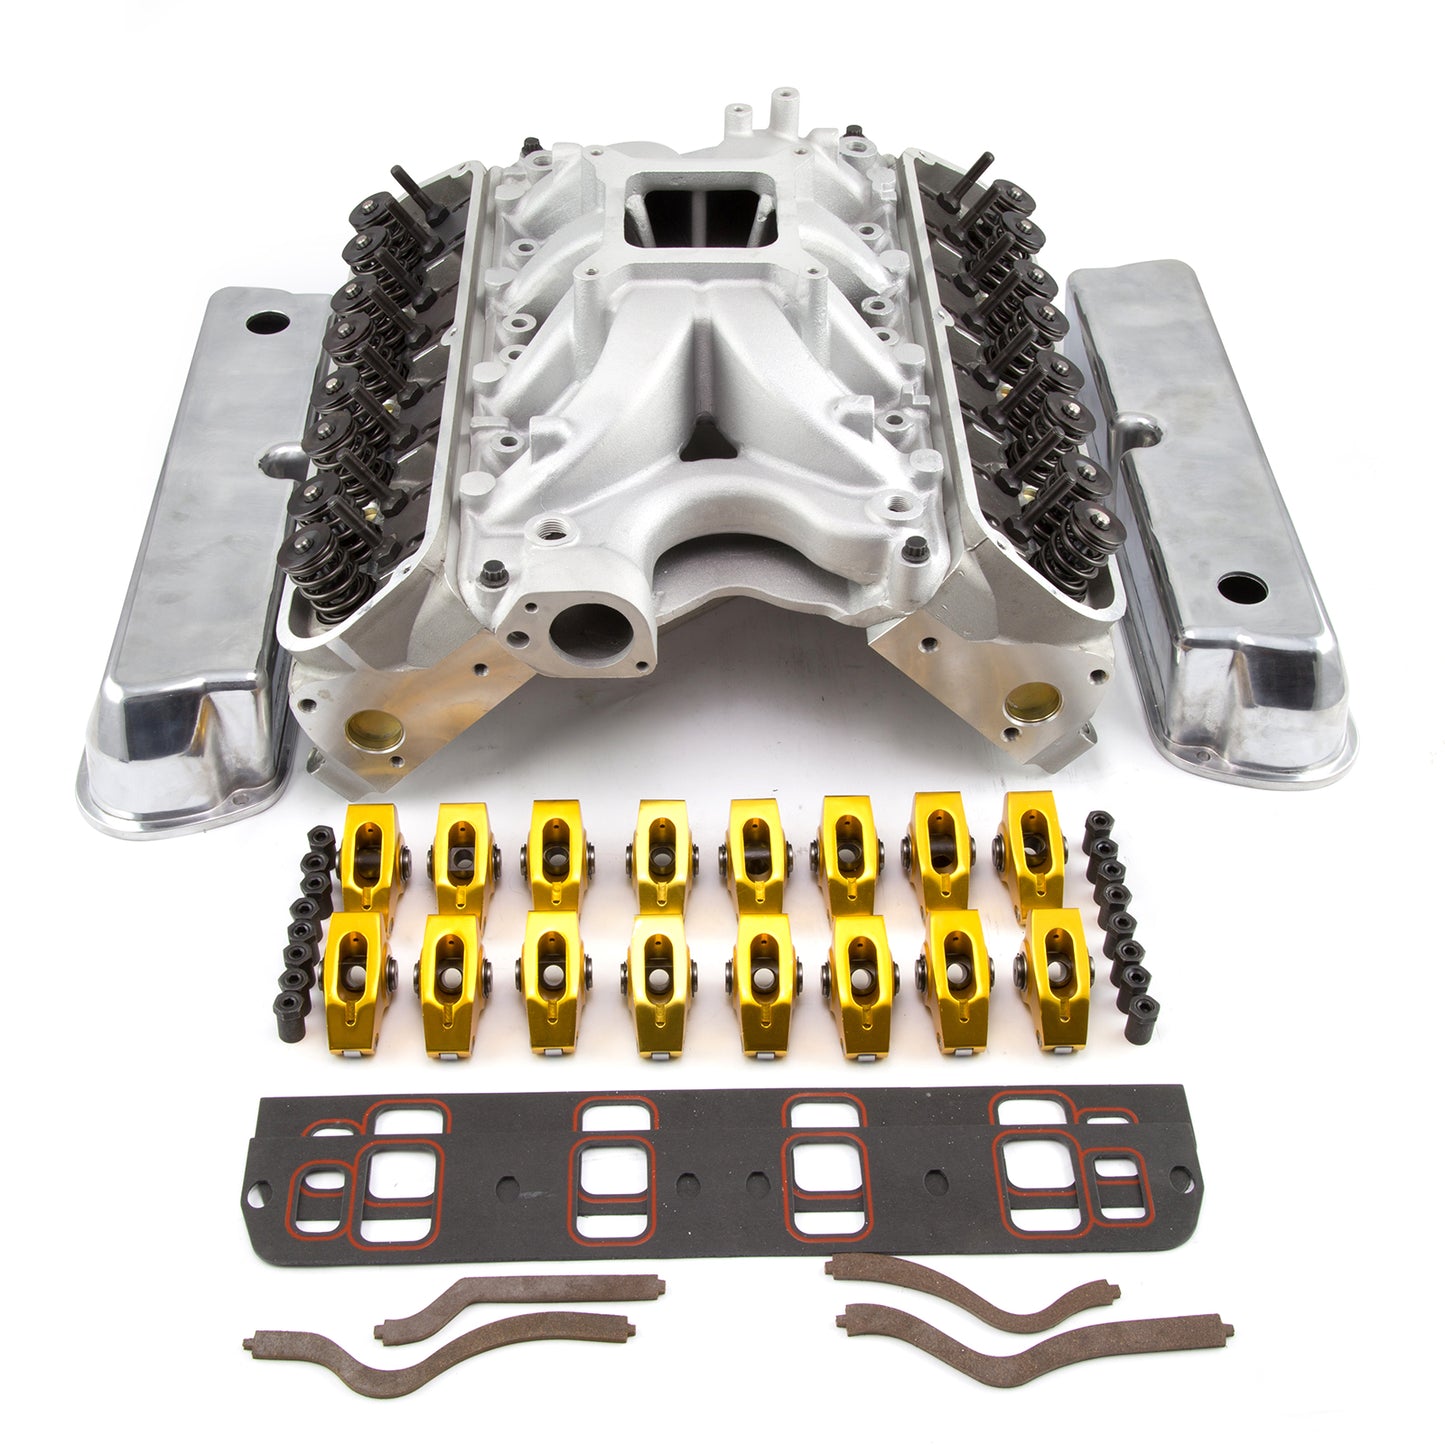 Speedmaster PCE435.1039 Fits Ford 351W Windsor Solid Roller CNC Cylinder Head Top End Engine Combo Kit